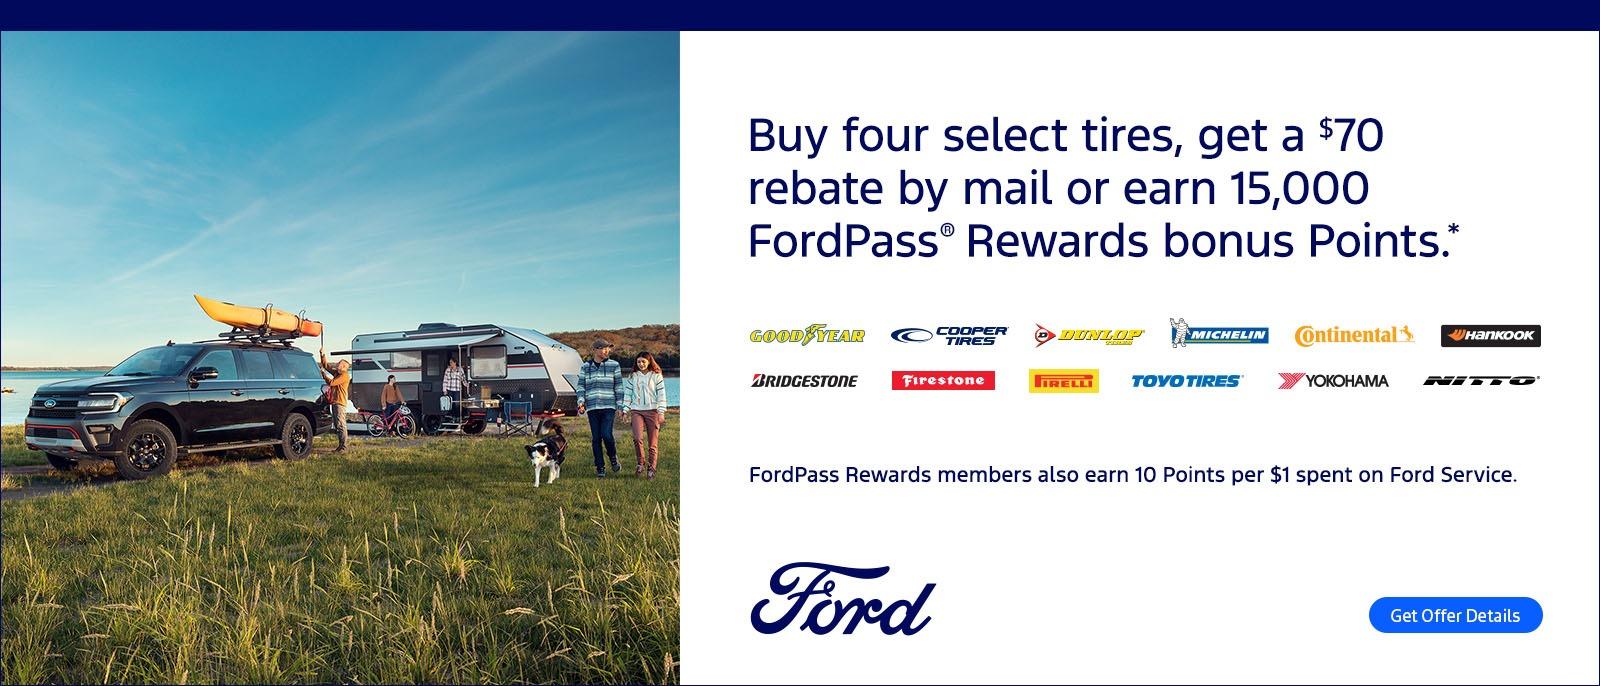 Buy four select tires, get a $70 rebate by mail or earn 15,000 FordPass Rewards bonus Points.